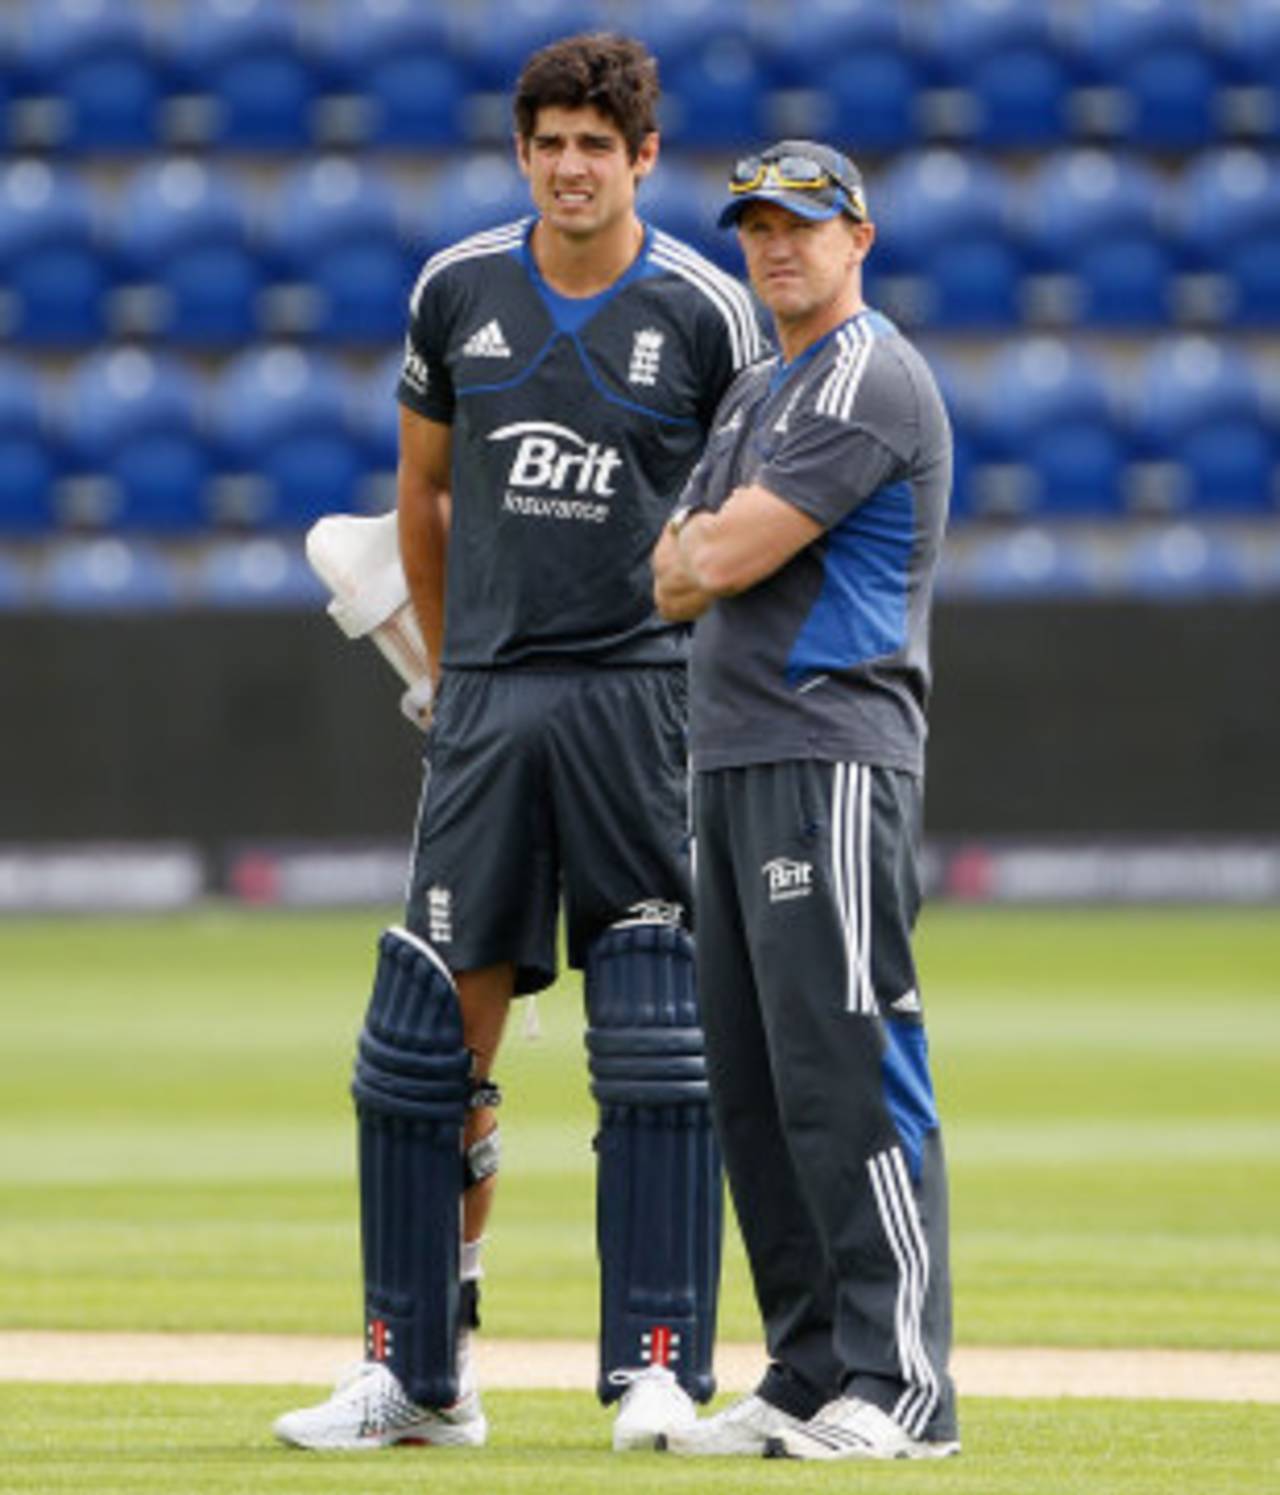 New partnership: Alastair Cook has settled impressively into the role of England's one-day captain&nbsp;&nbsp;&bull;&nbsp;&nbsp;Getty Images